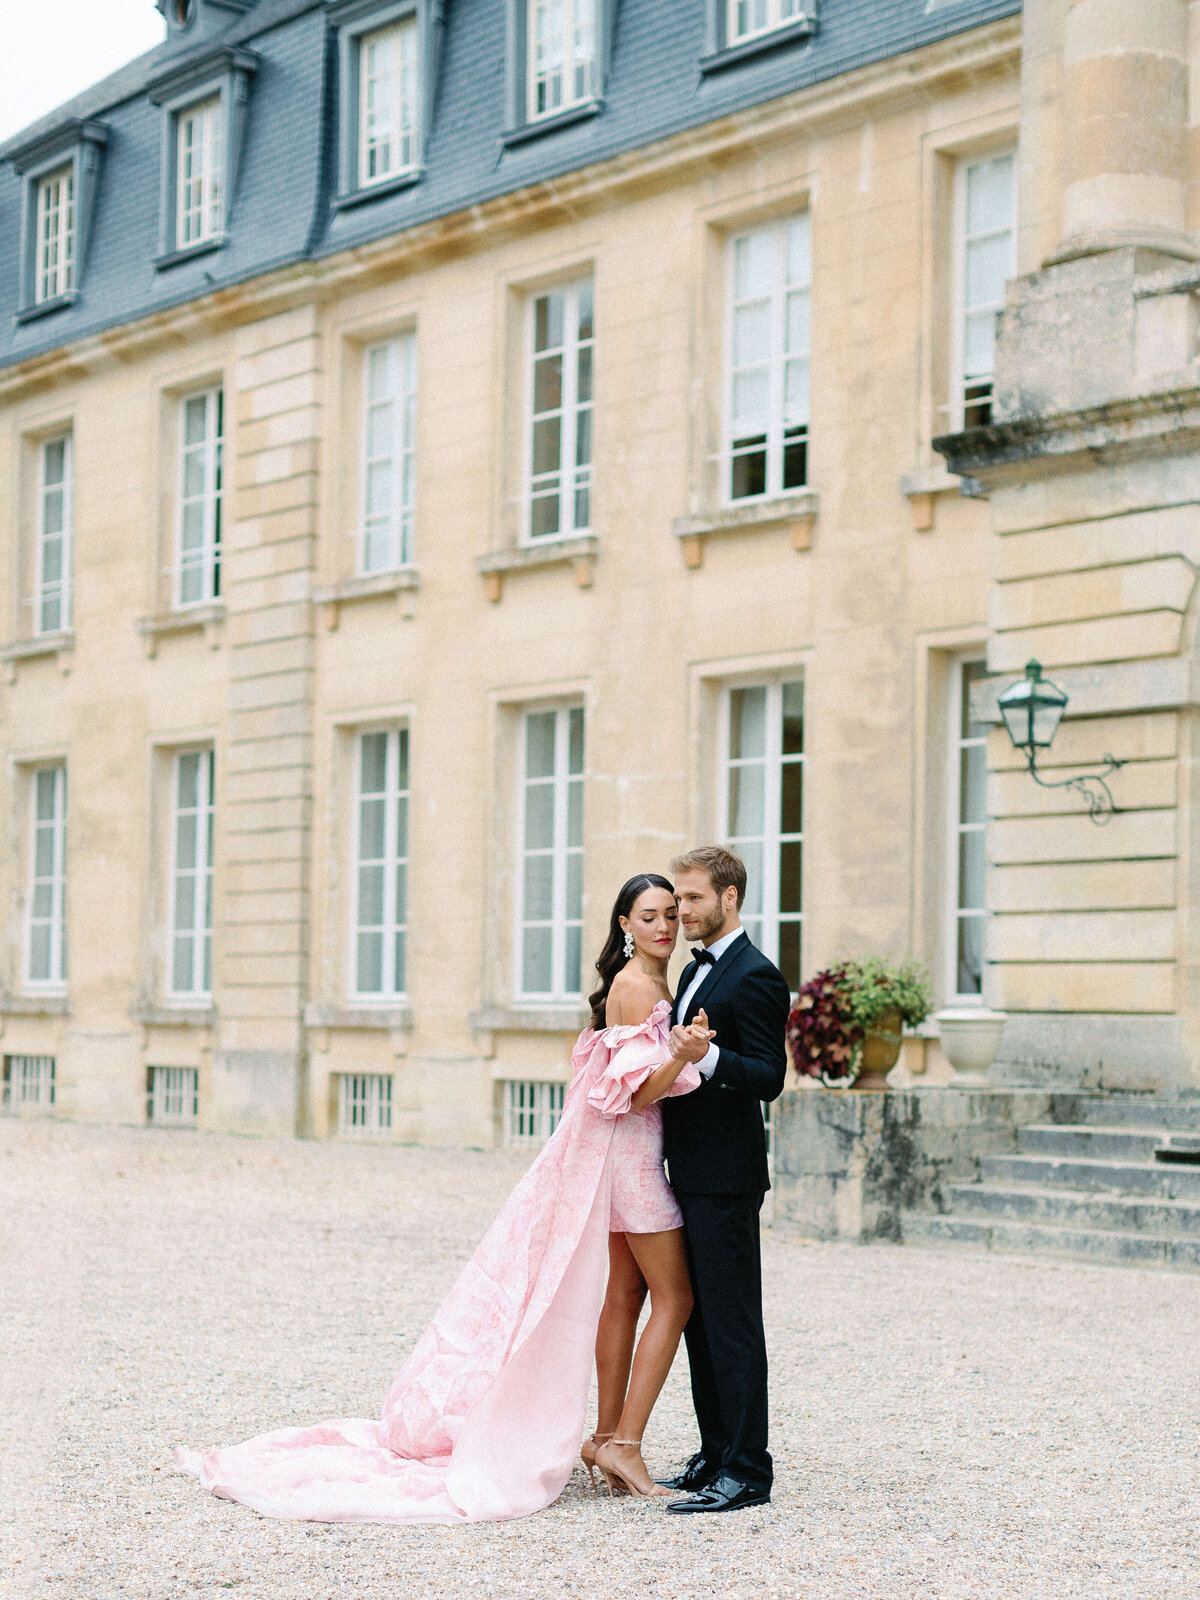 Spring_French Chateau_Destinationelopement_in France007